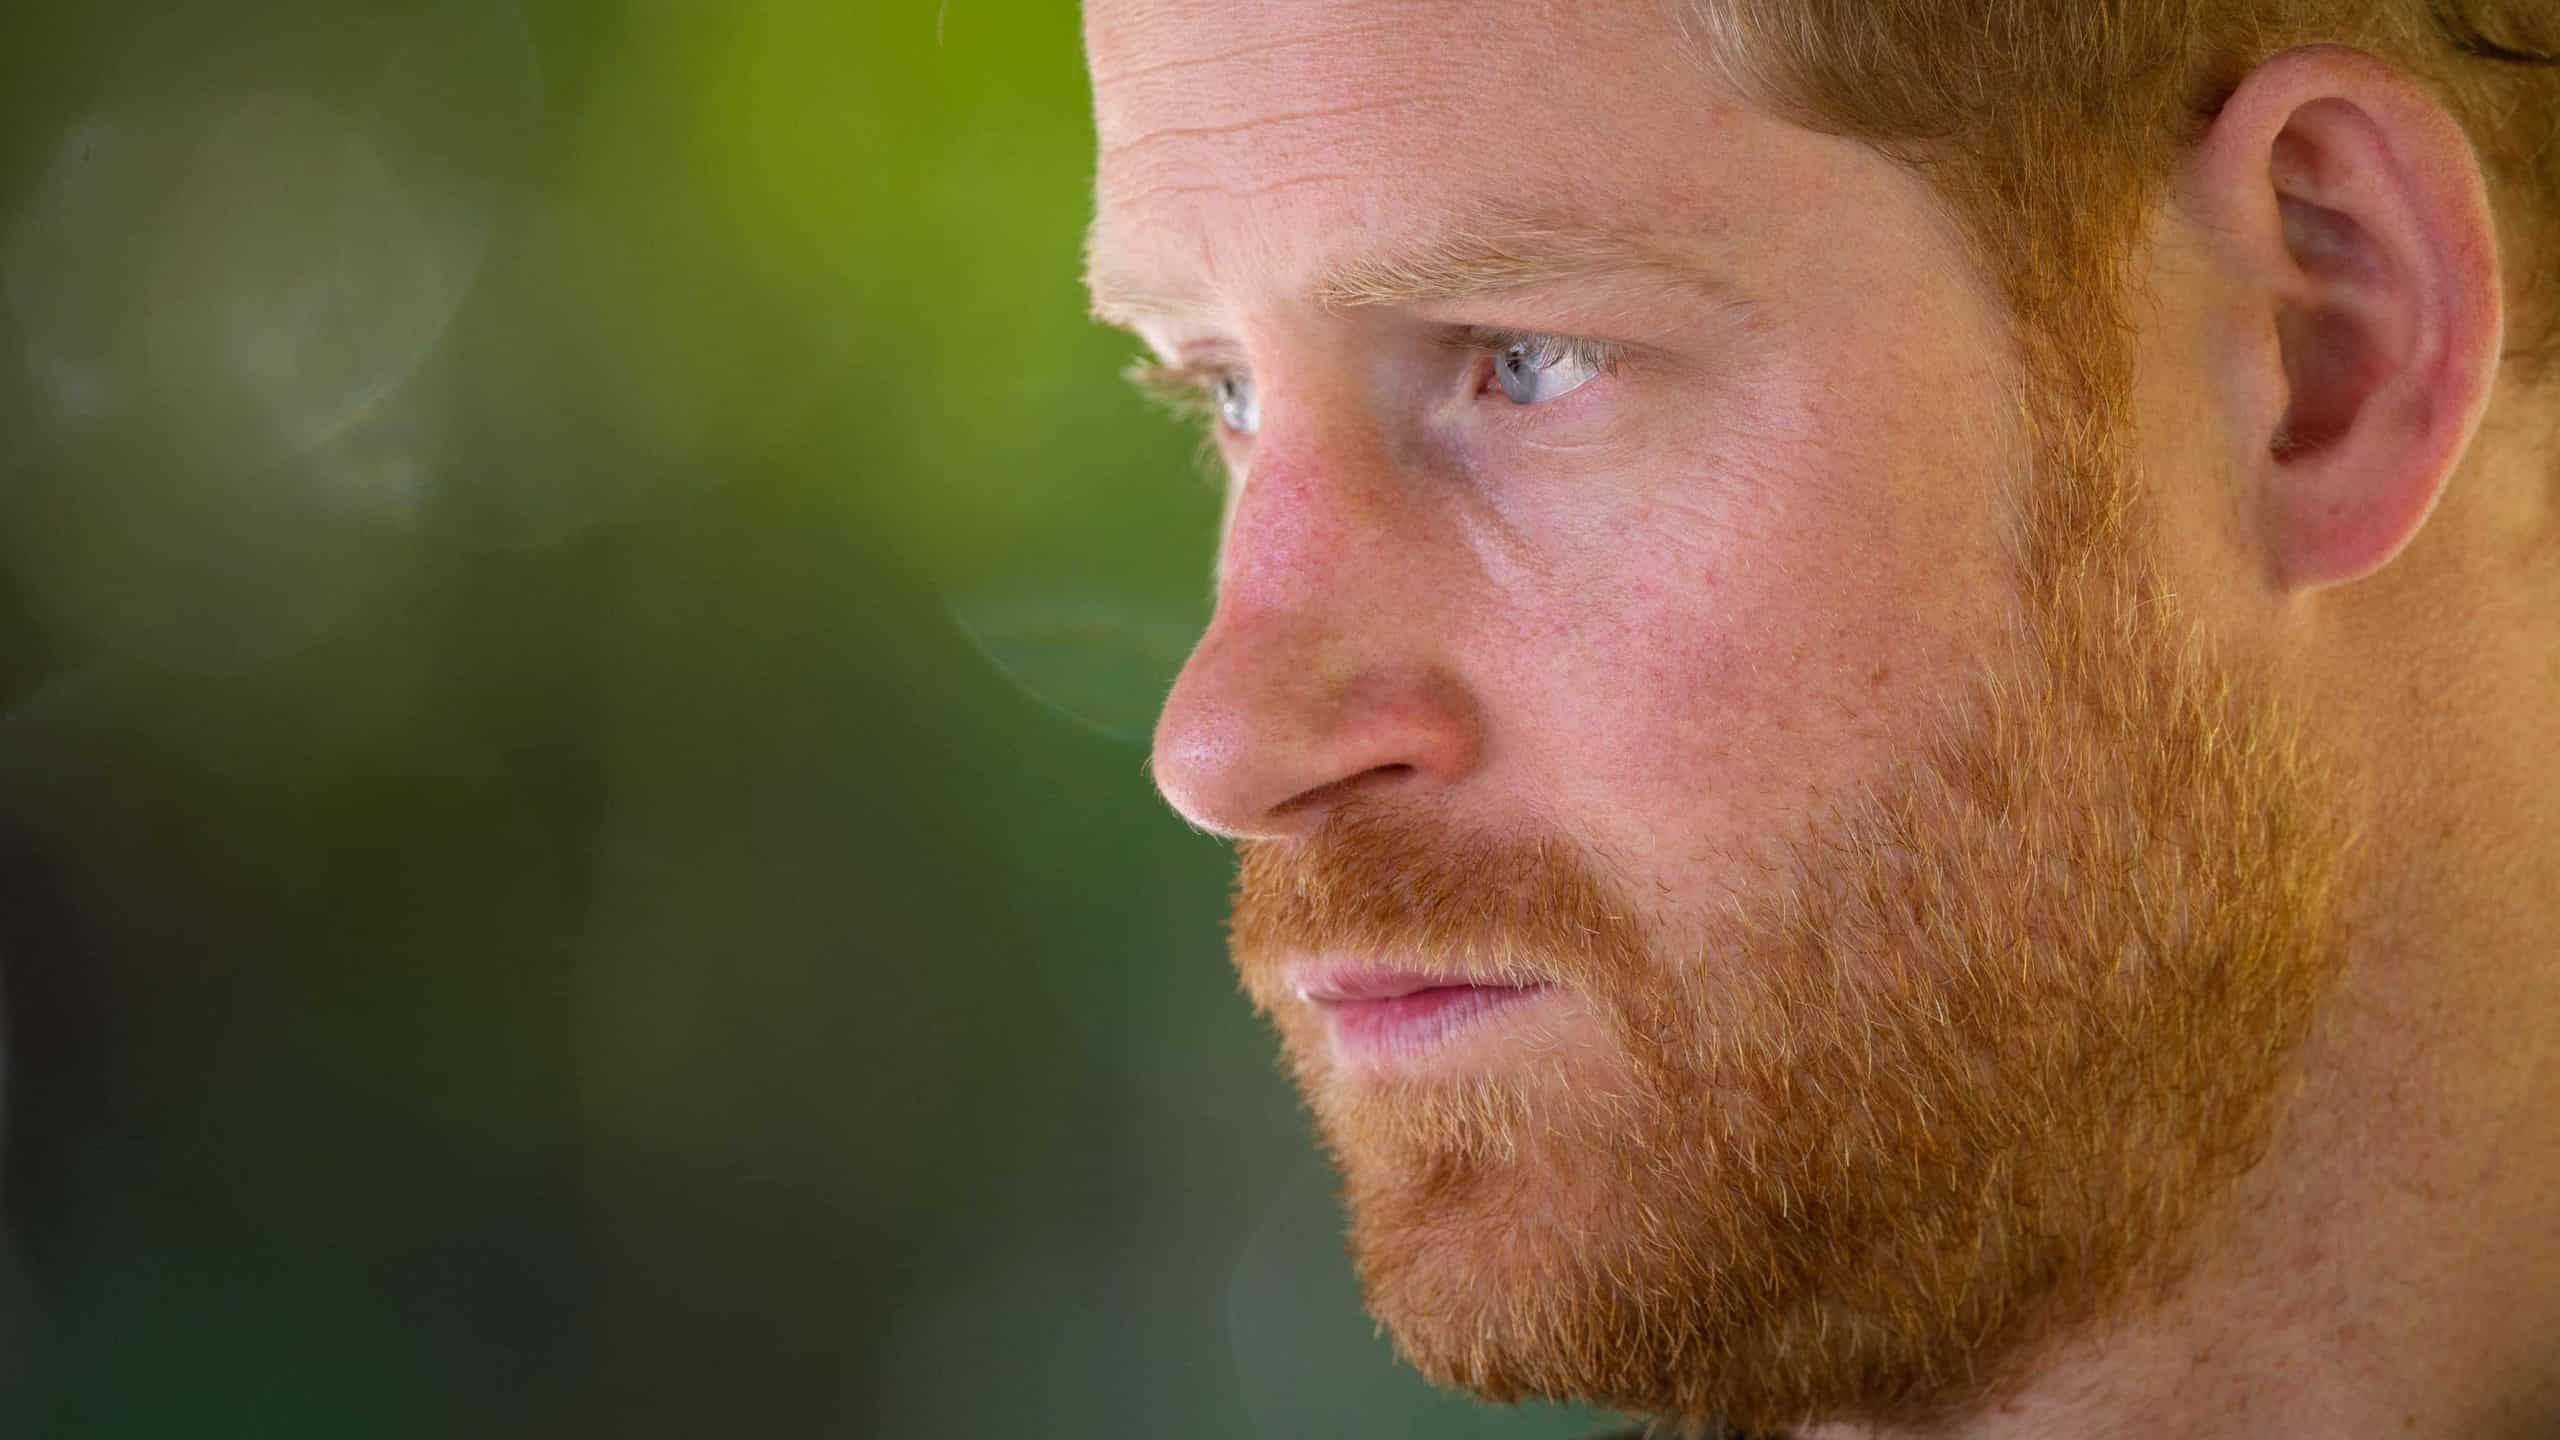 Prince Harry to sue The Sun and Mirror over alleged phone hacking scandals